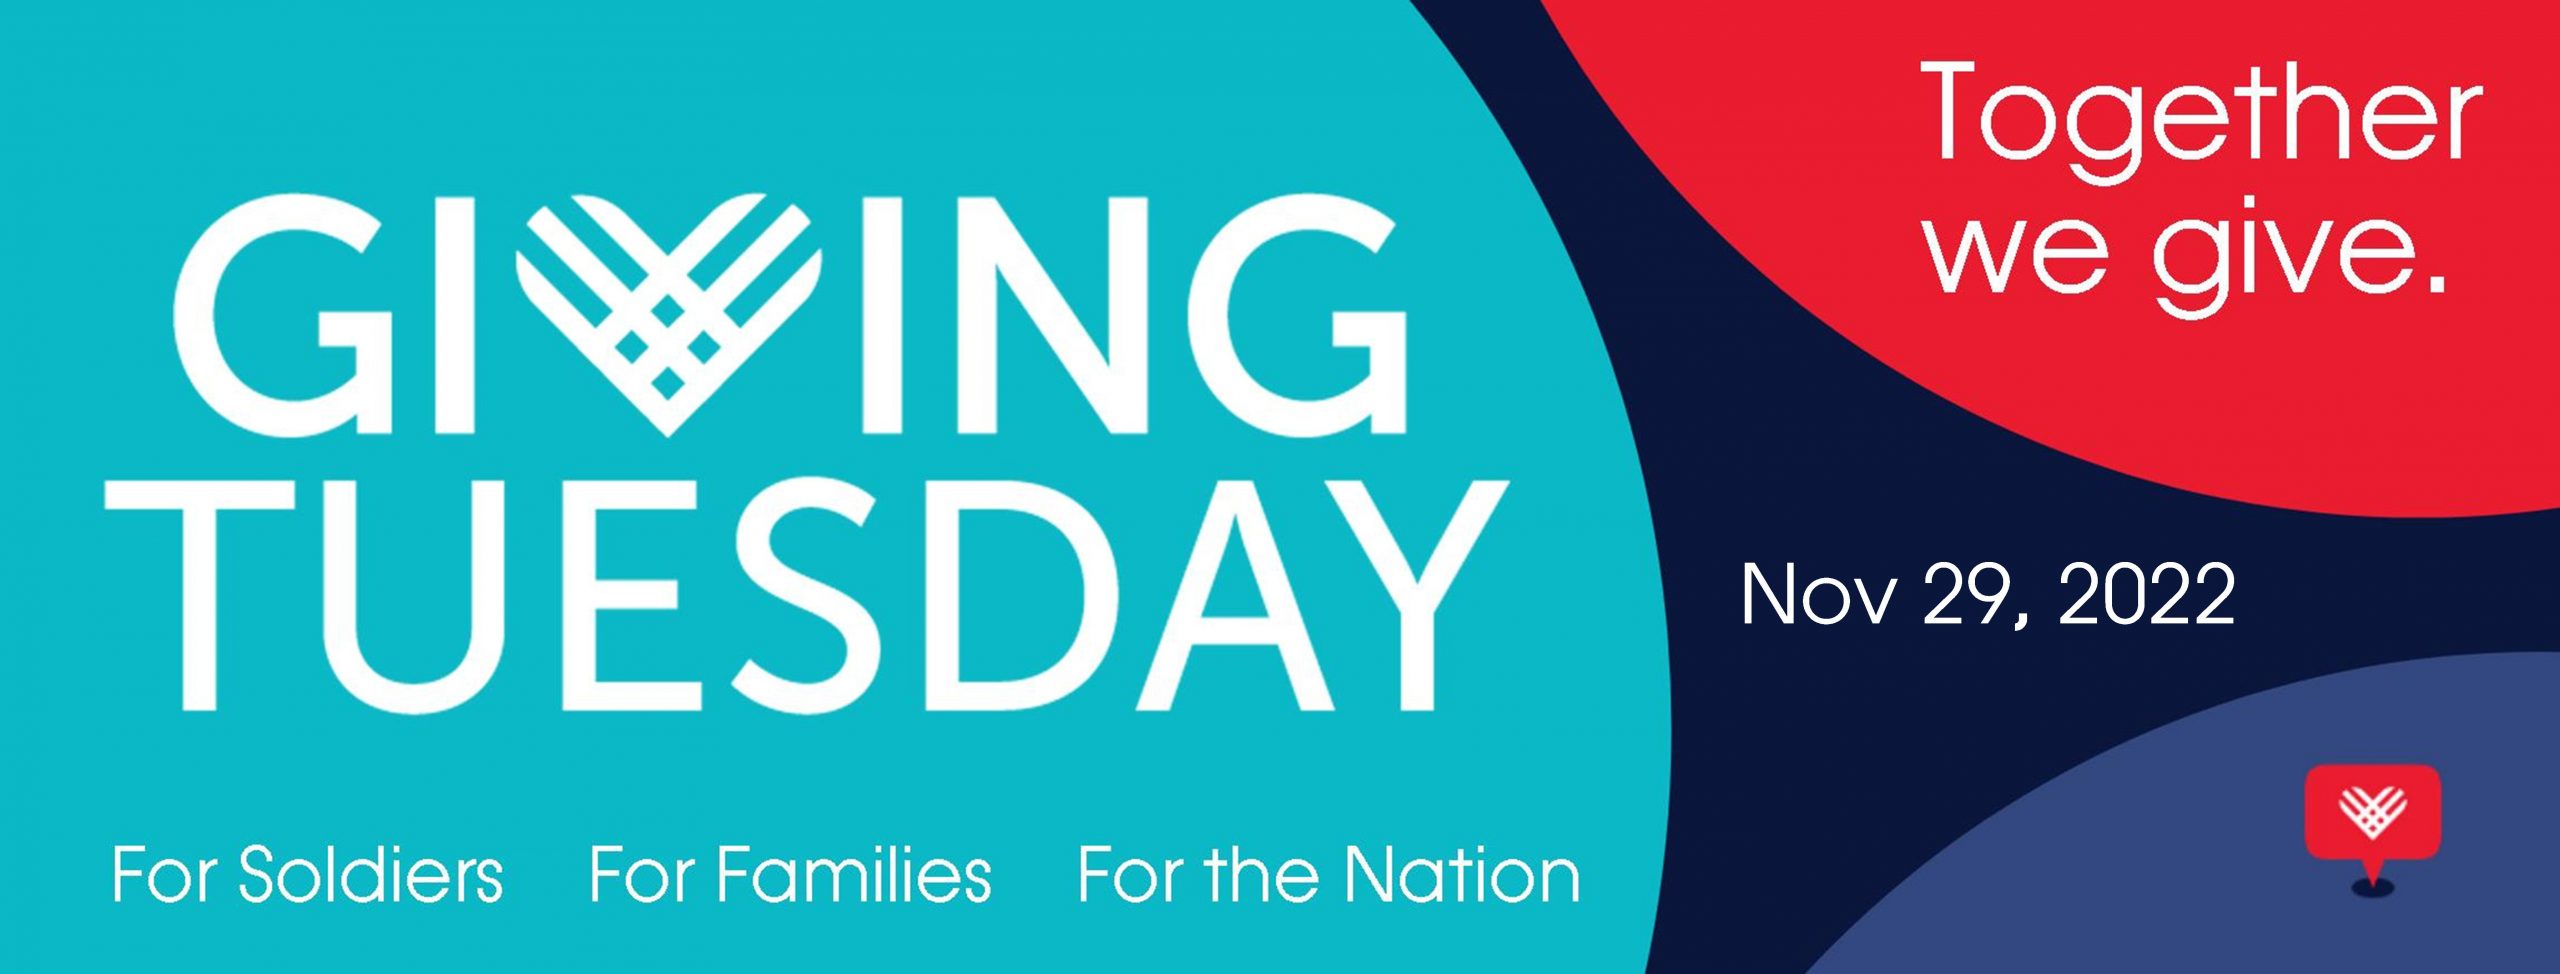 Giving Tuesday 2022 graphic